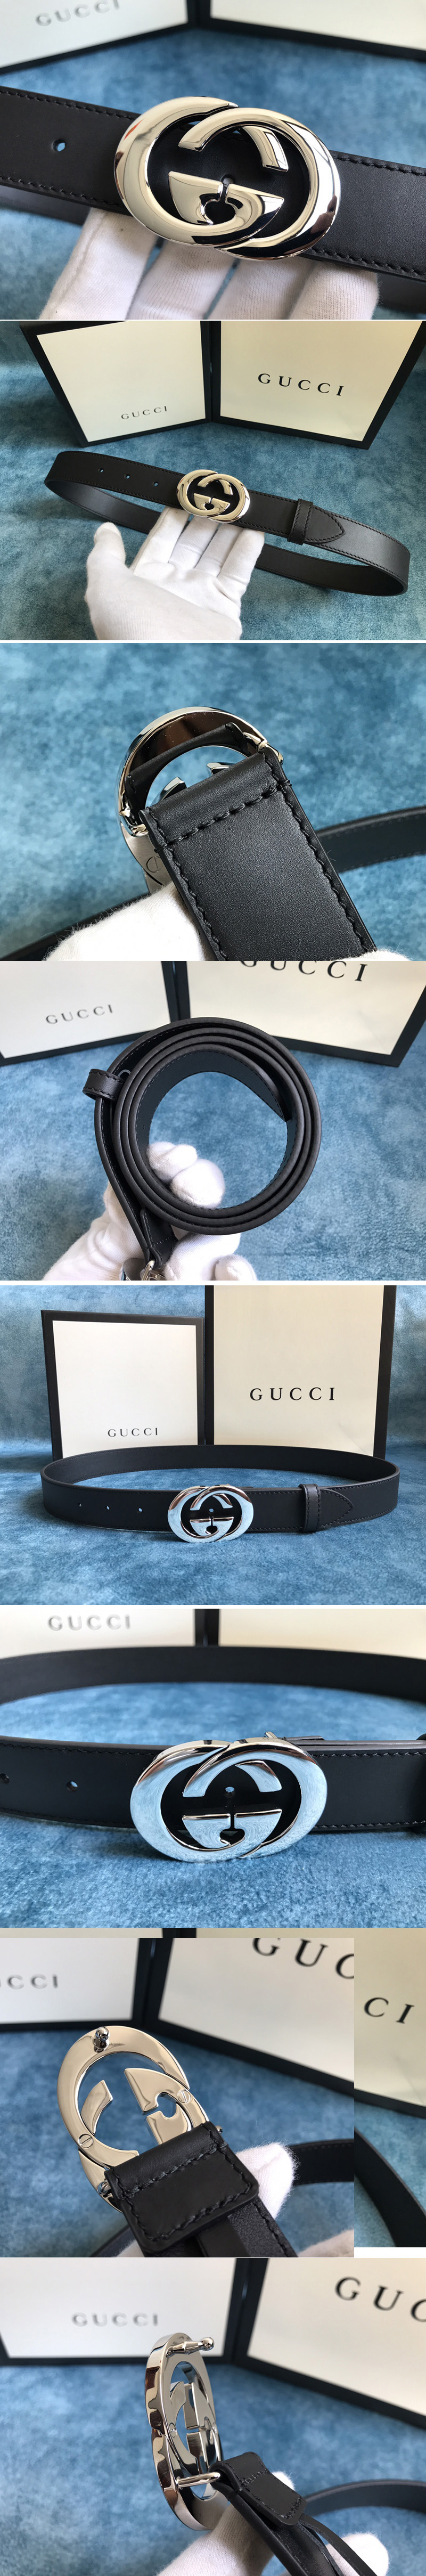 Replica Gucci 574807 30mm Belt with Silver Interlocking G buckle in Black Leather